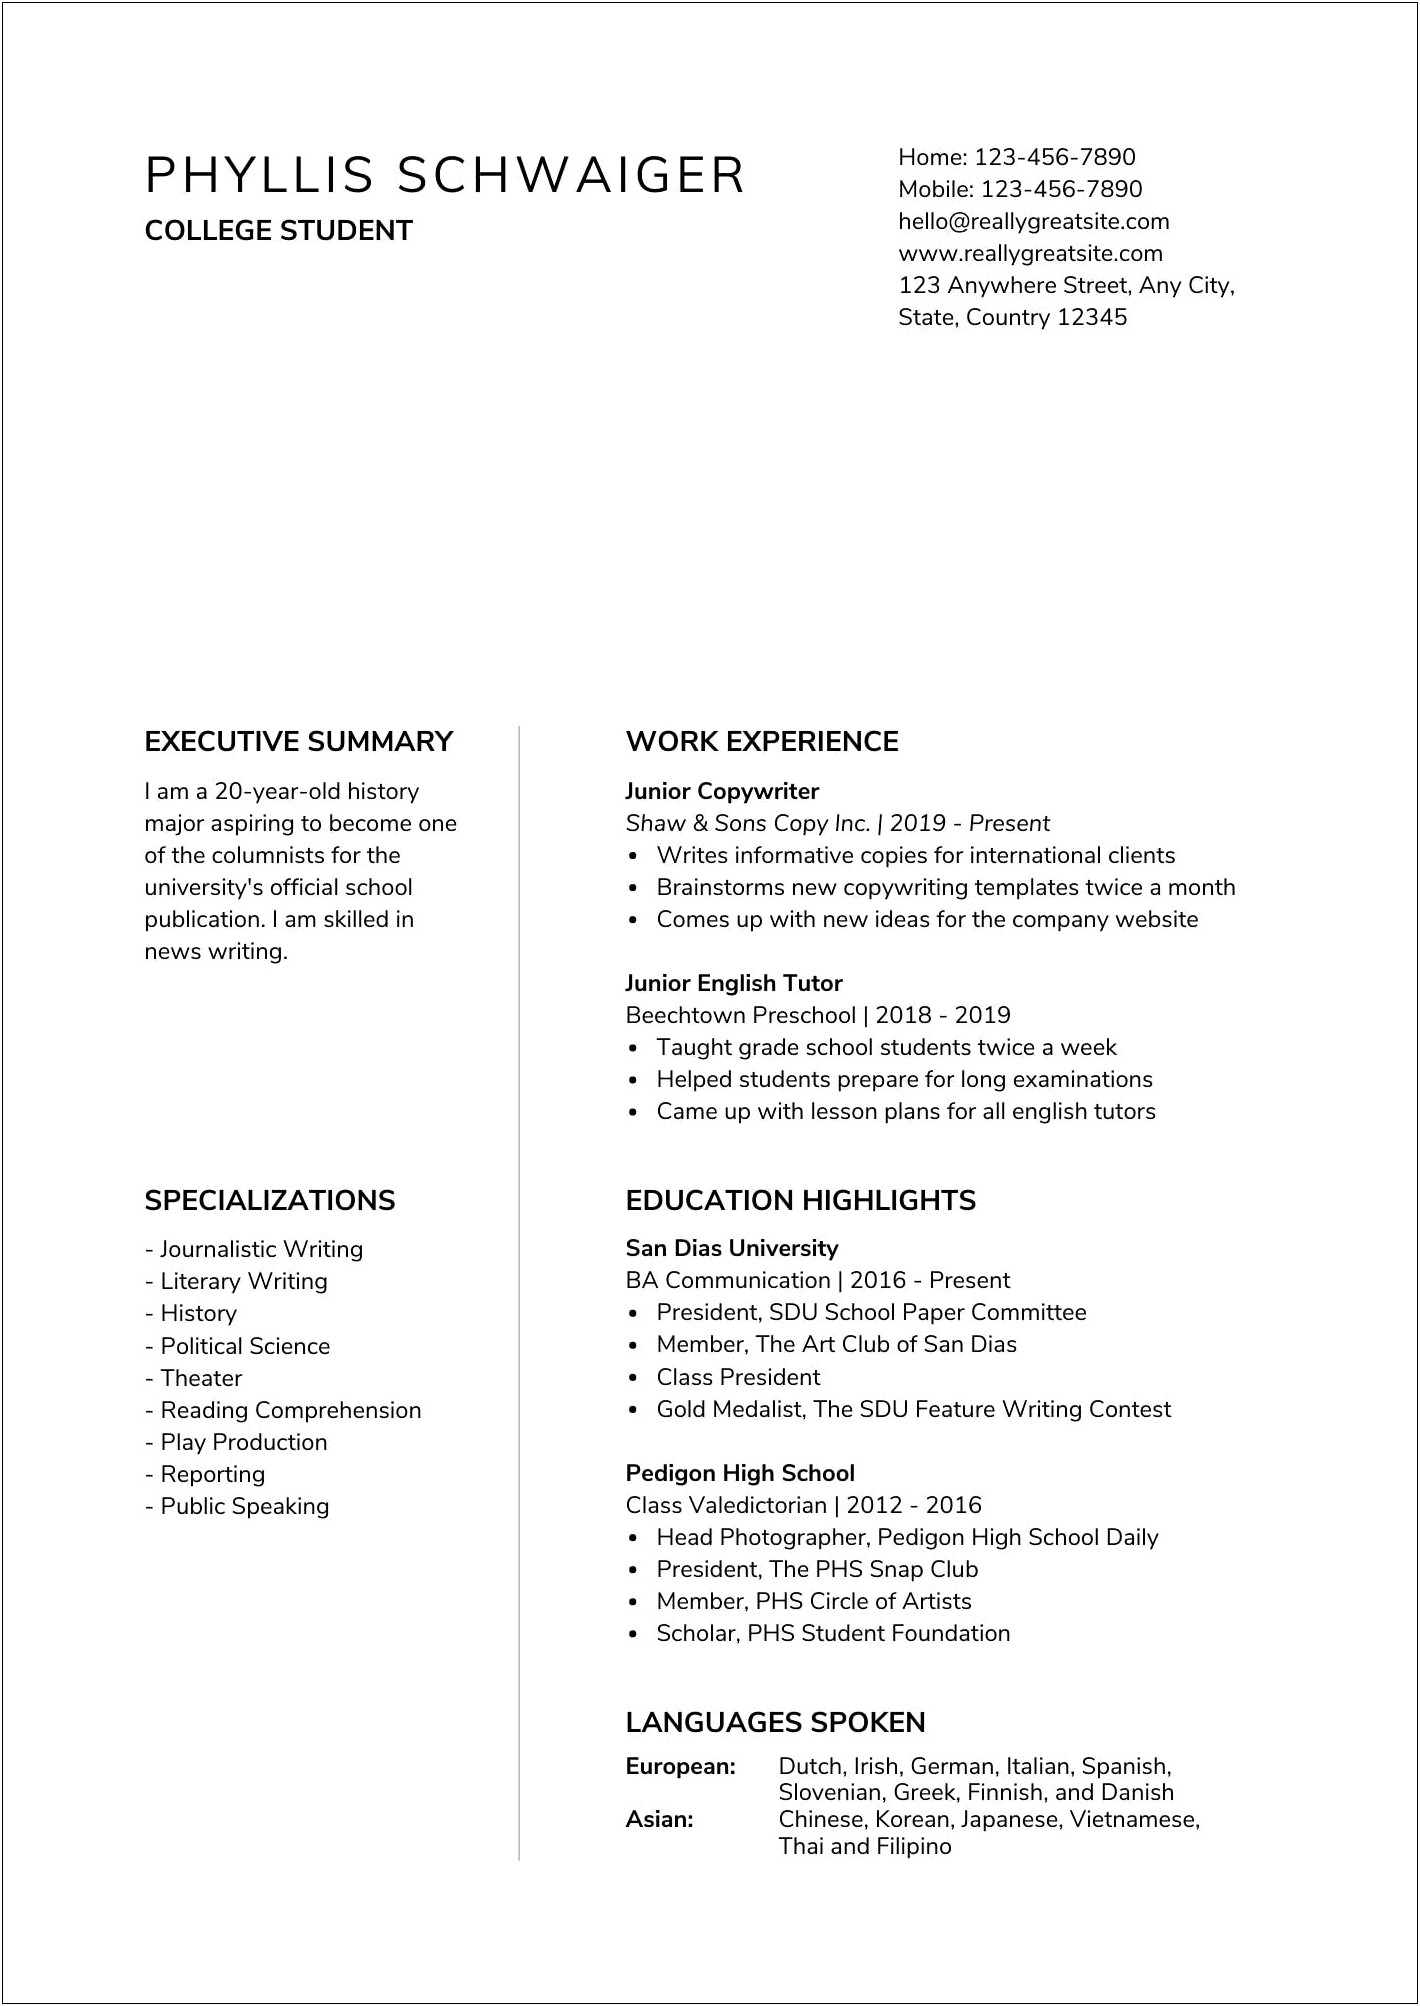 College Application Resume Template For High School Seniors